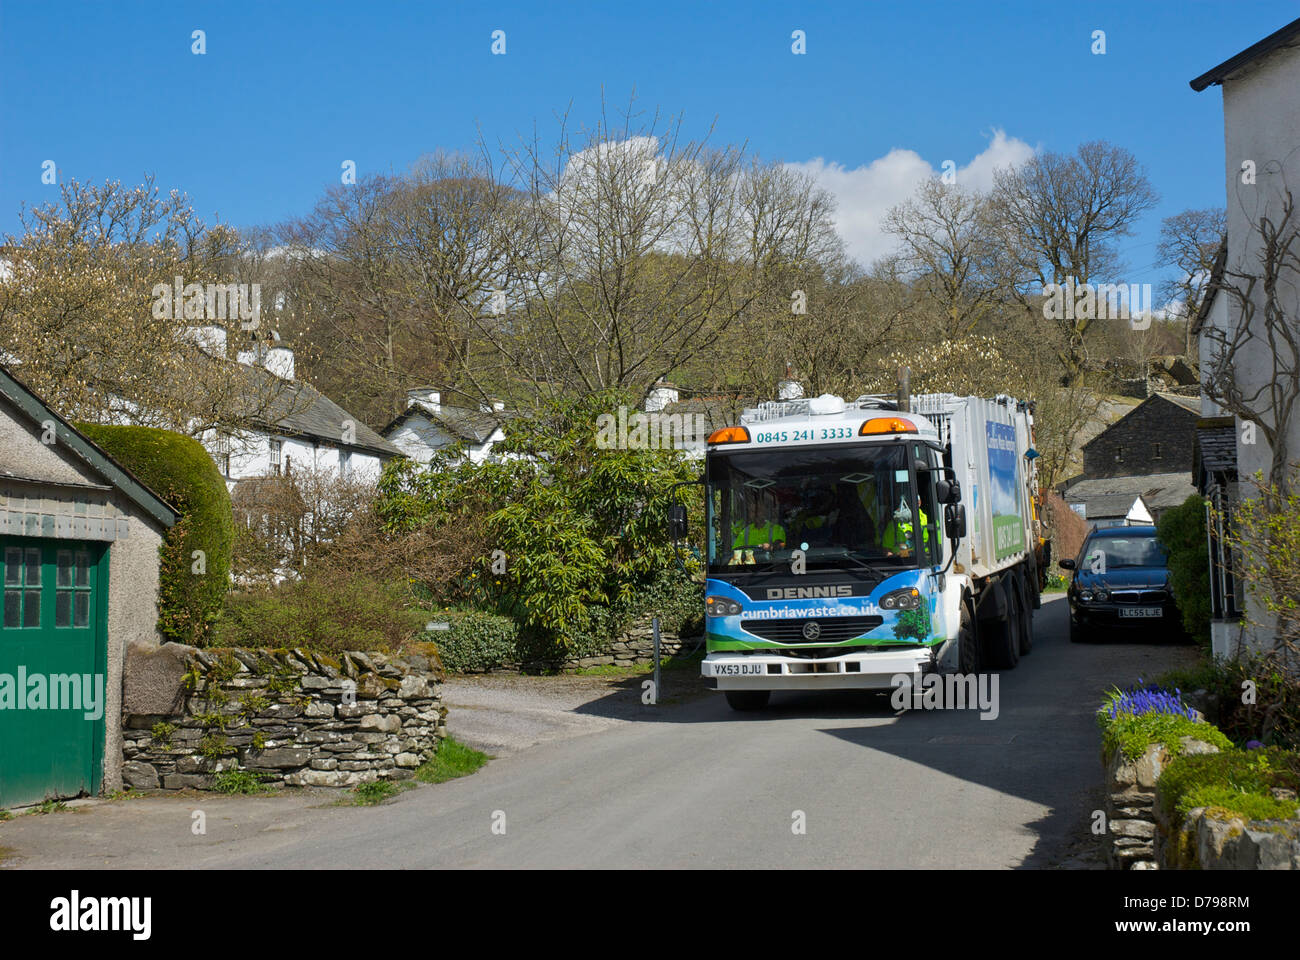 Refuse collection in the village of Near Sawrey, Lake District National Park, Cumbria, England UK Stock Photo